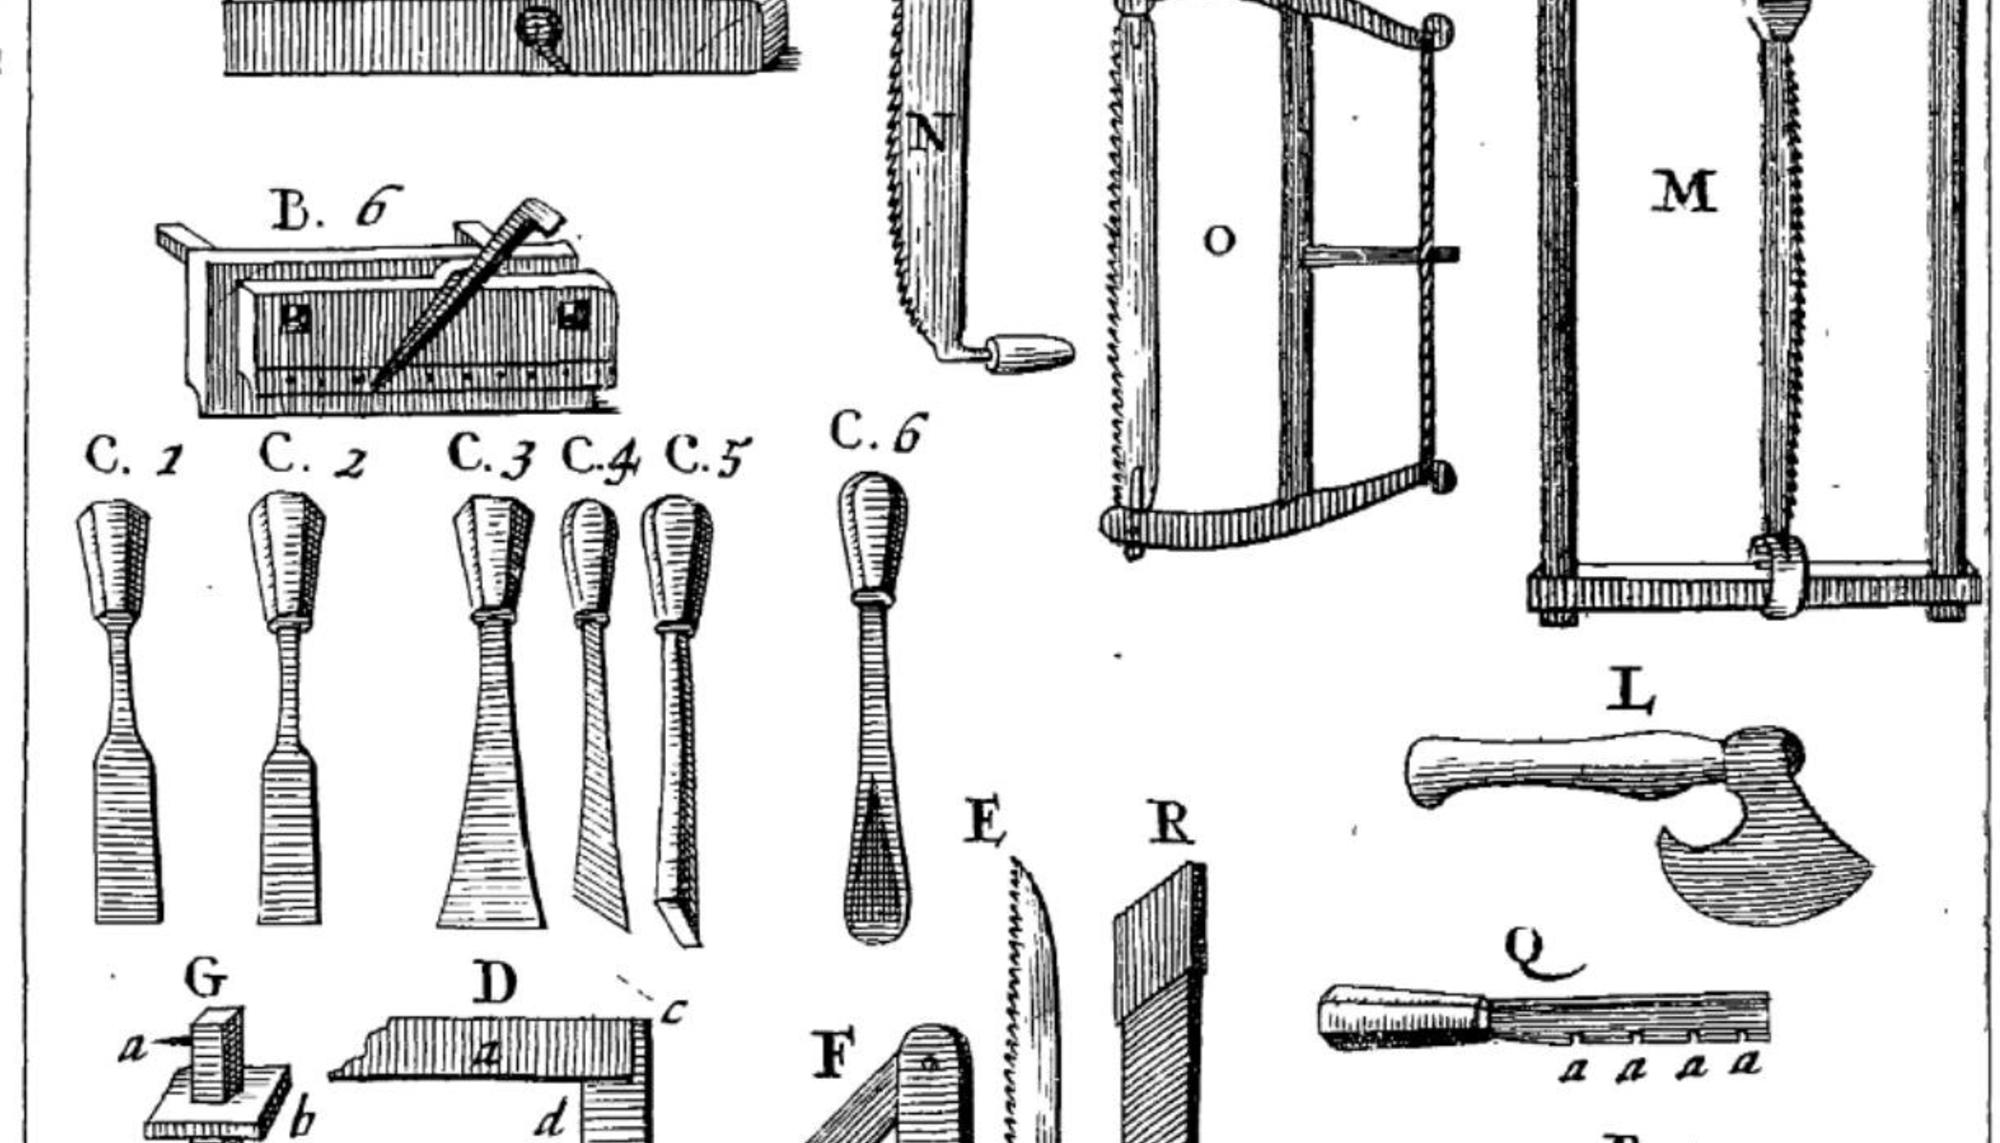 Joseph Moxon, Mechanick exercises: or The doctrine of handy-works applied to the arts of smithing, joinery, carpentry, turning, bricklayery [1703]